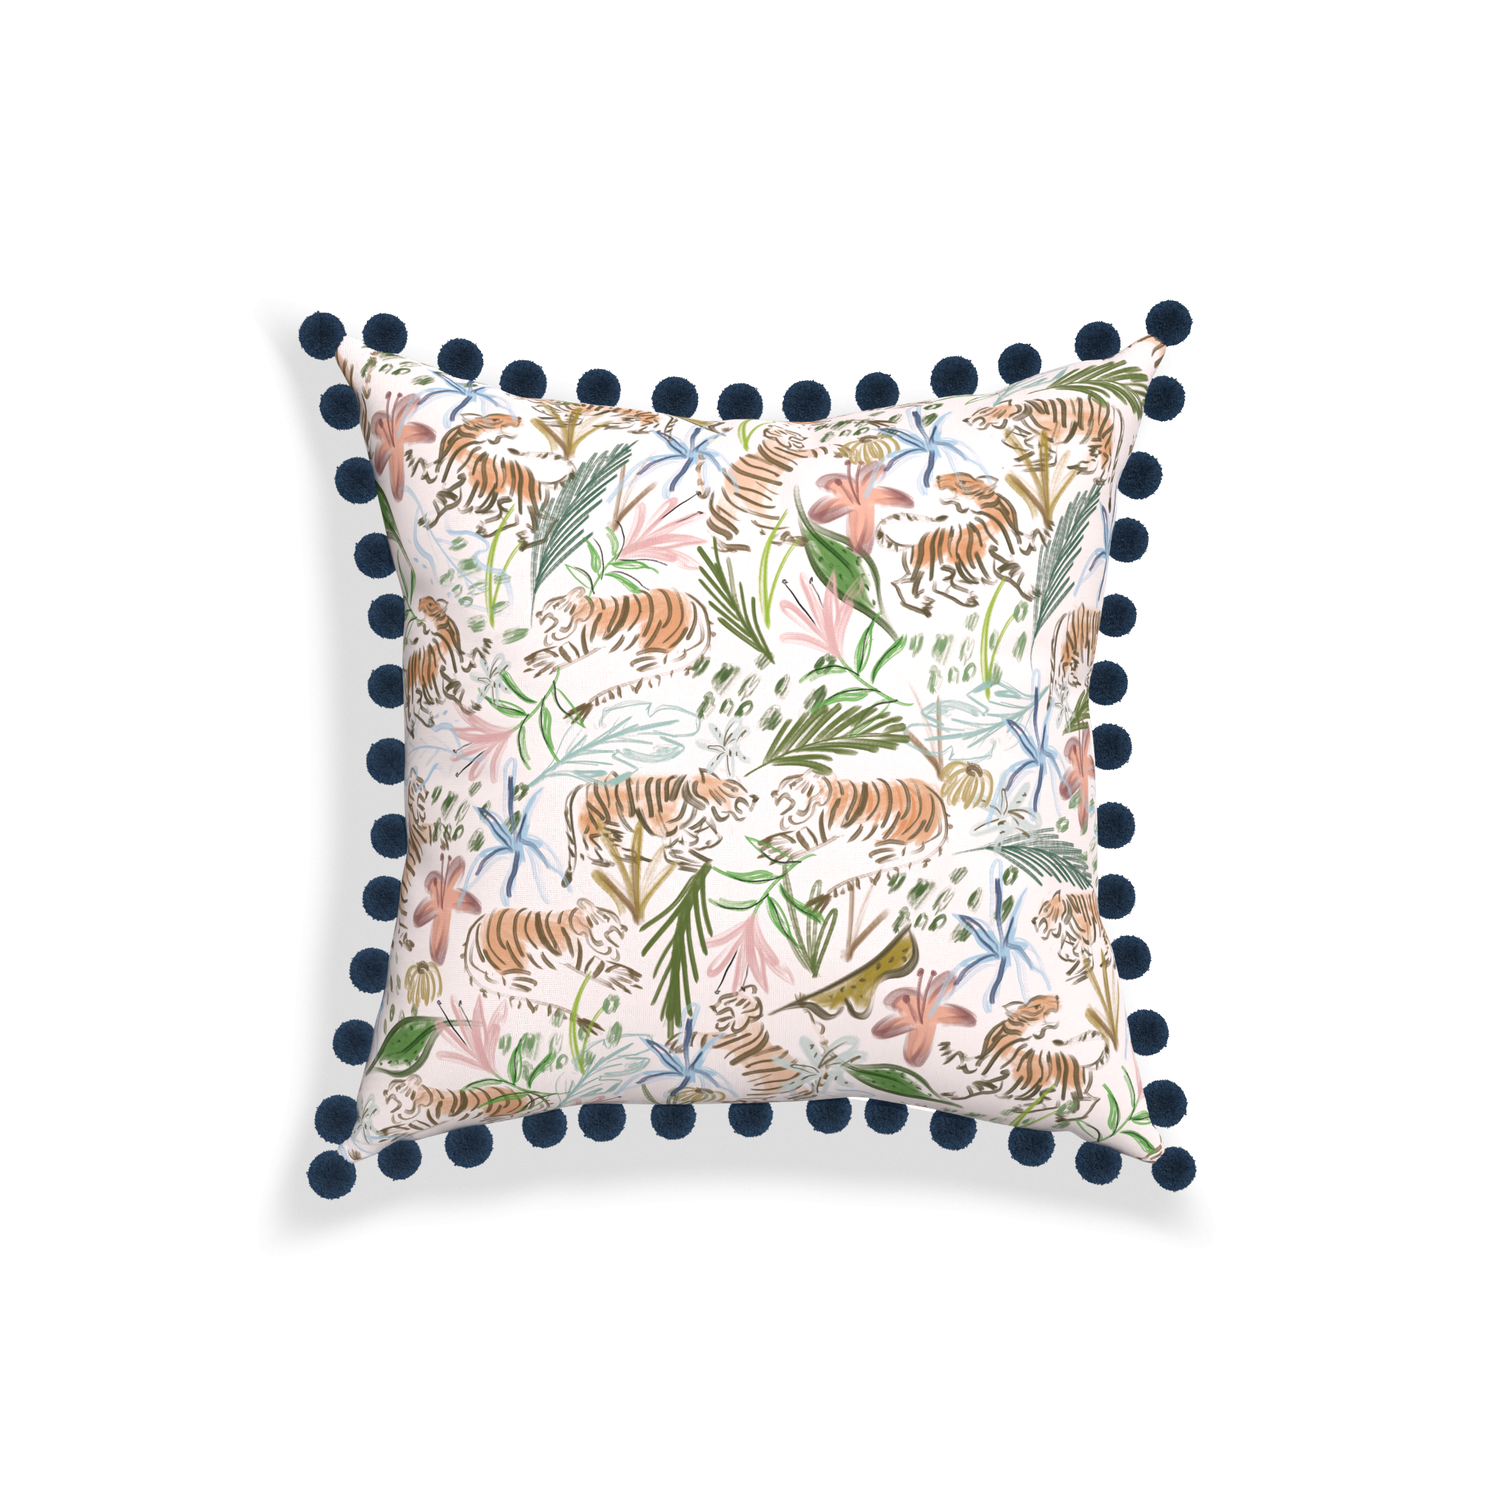 18-square frida pink custom pink chinoiserie tigerpillow with c on white background